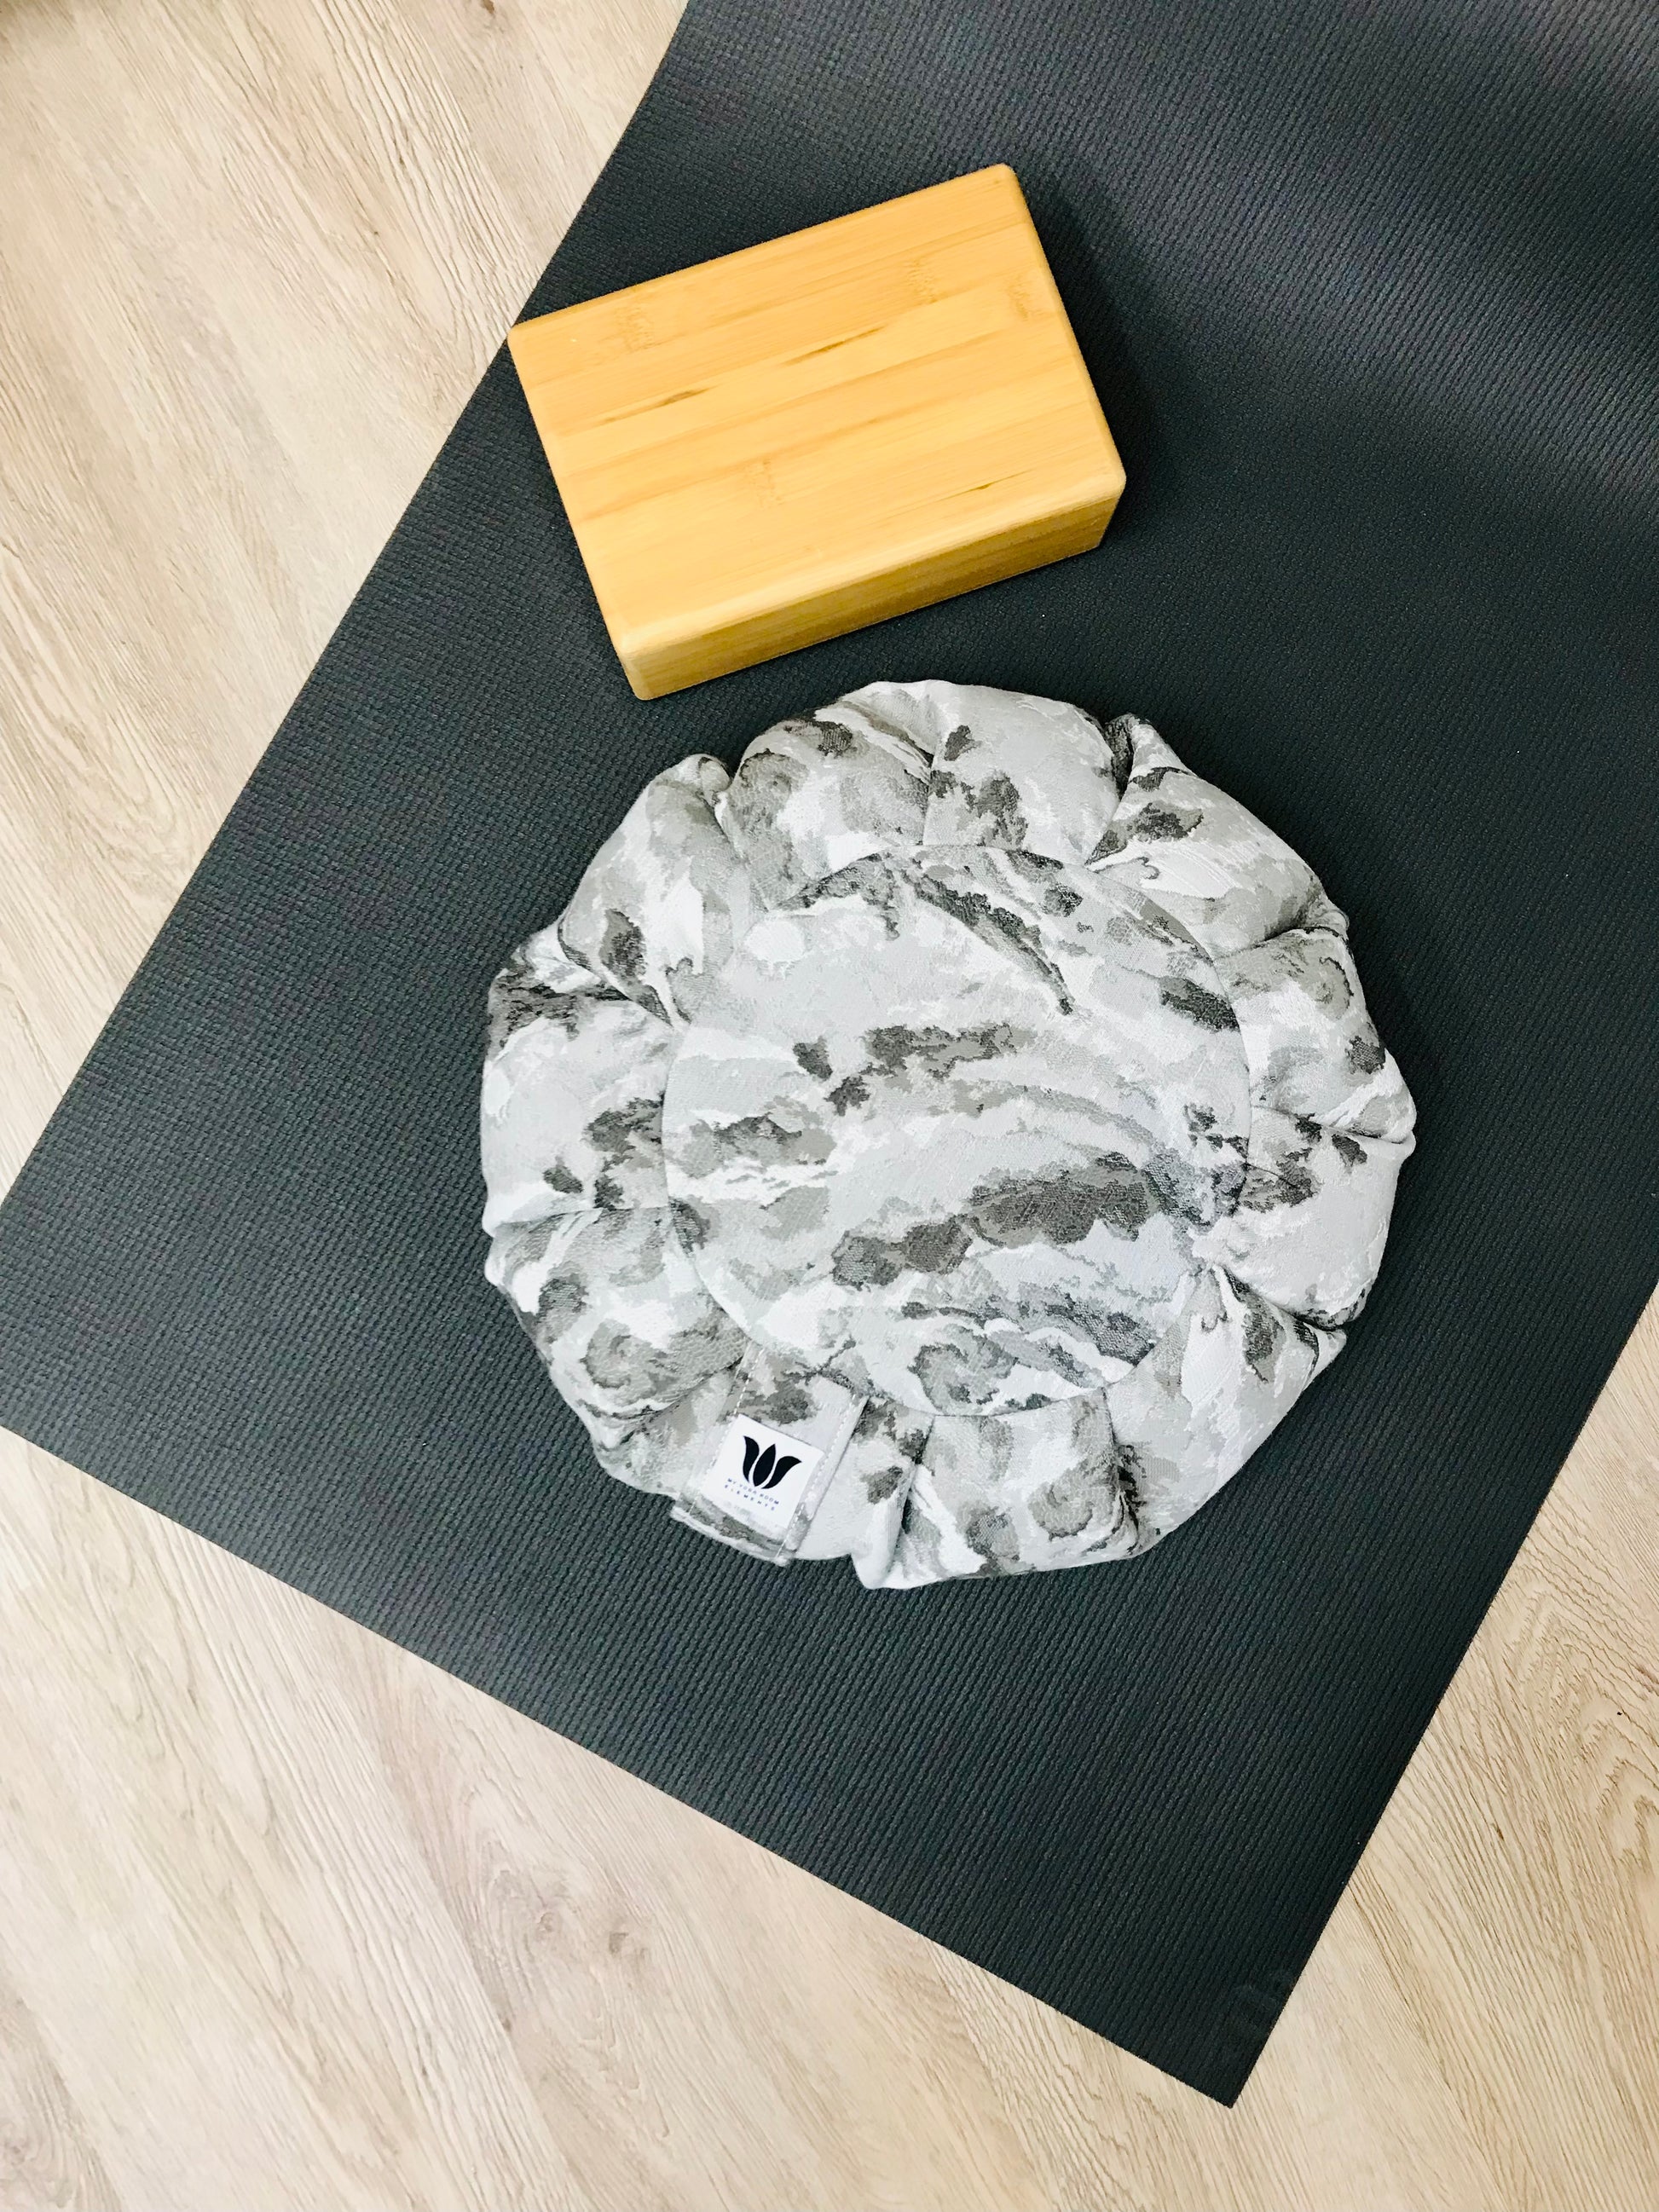 Handcrafted premium cotton home decor fabric meditation seat cushion in grey marble print fabric. Align the spine and body in comfort to calm the monkey mind in your meditation practice. Handcrafted in Calgary, Alberta Canada